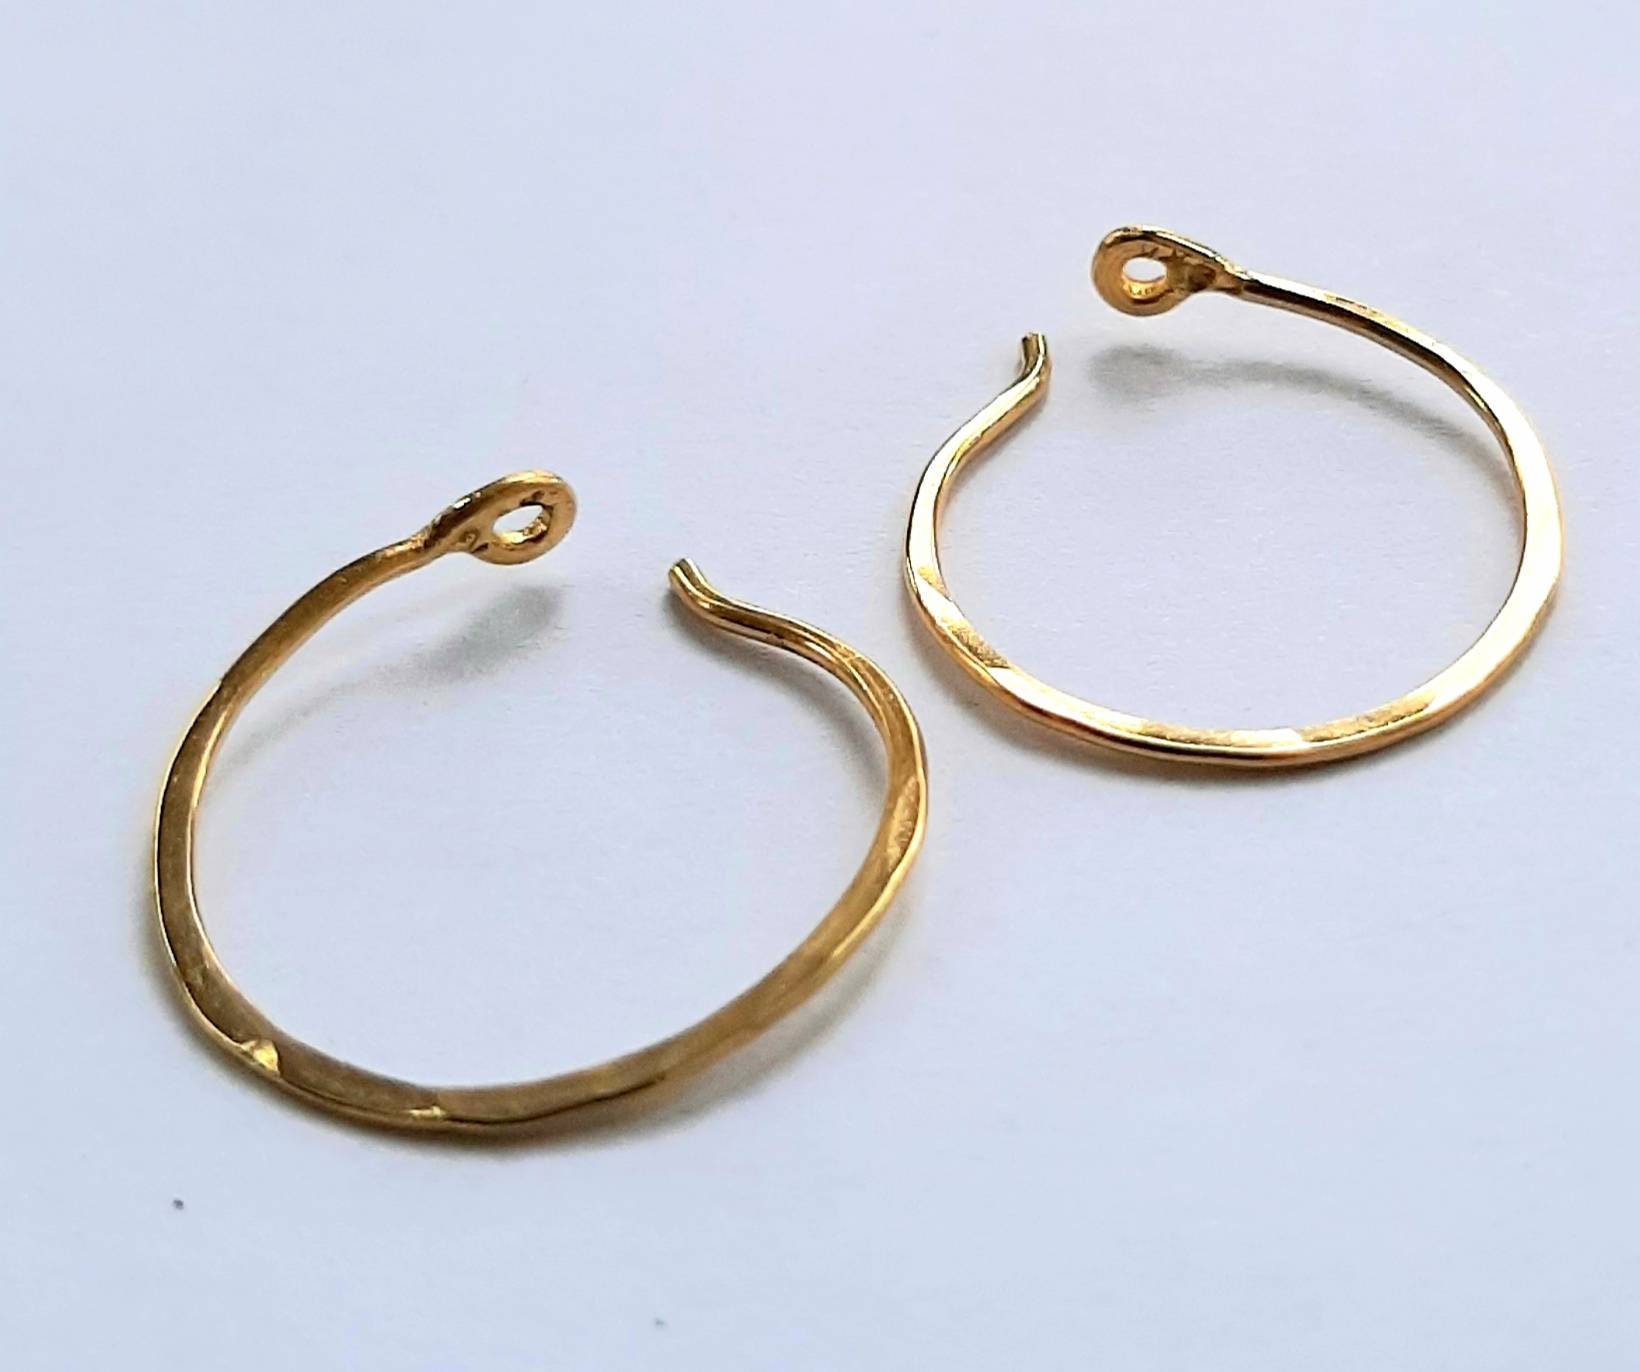 24K Gold Hoop Earrings. Pure, Hypoallergenic Thread of Gold Hoops With ...